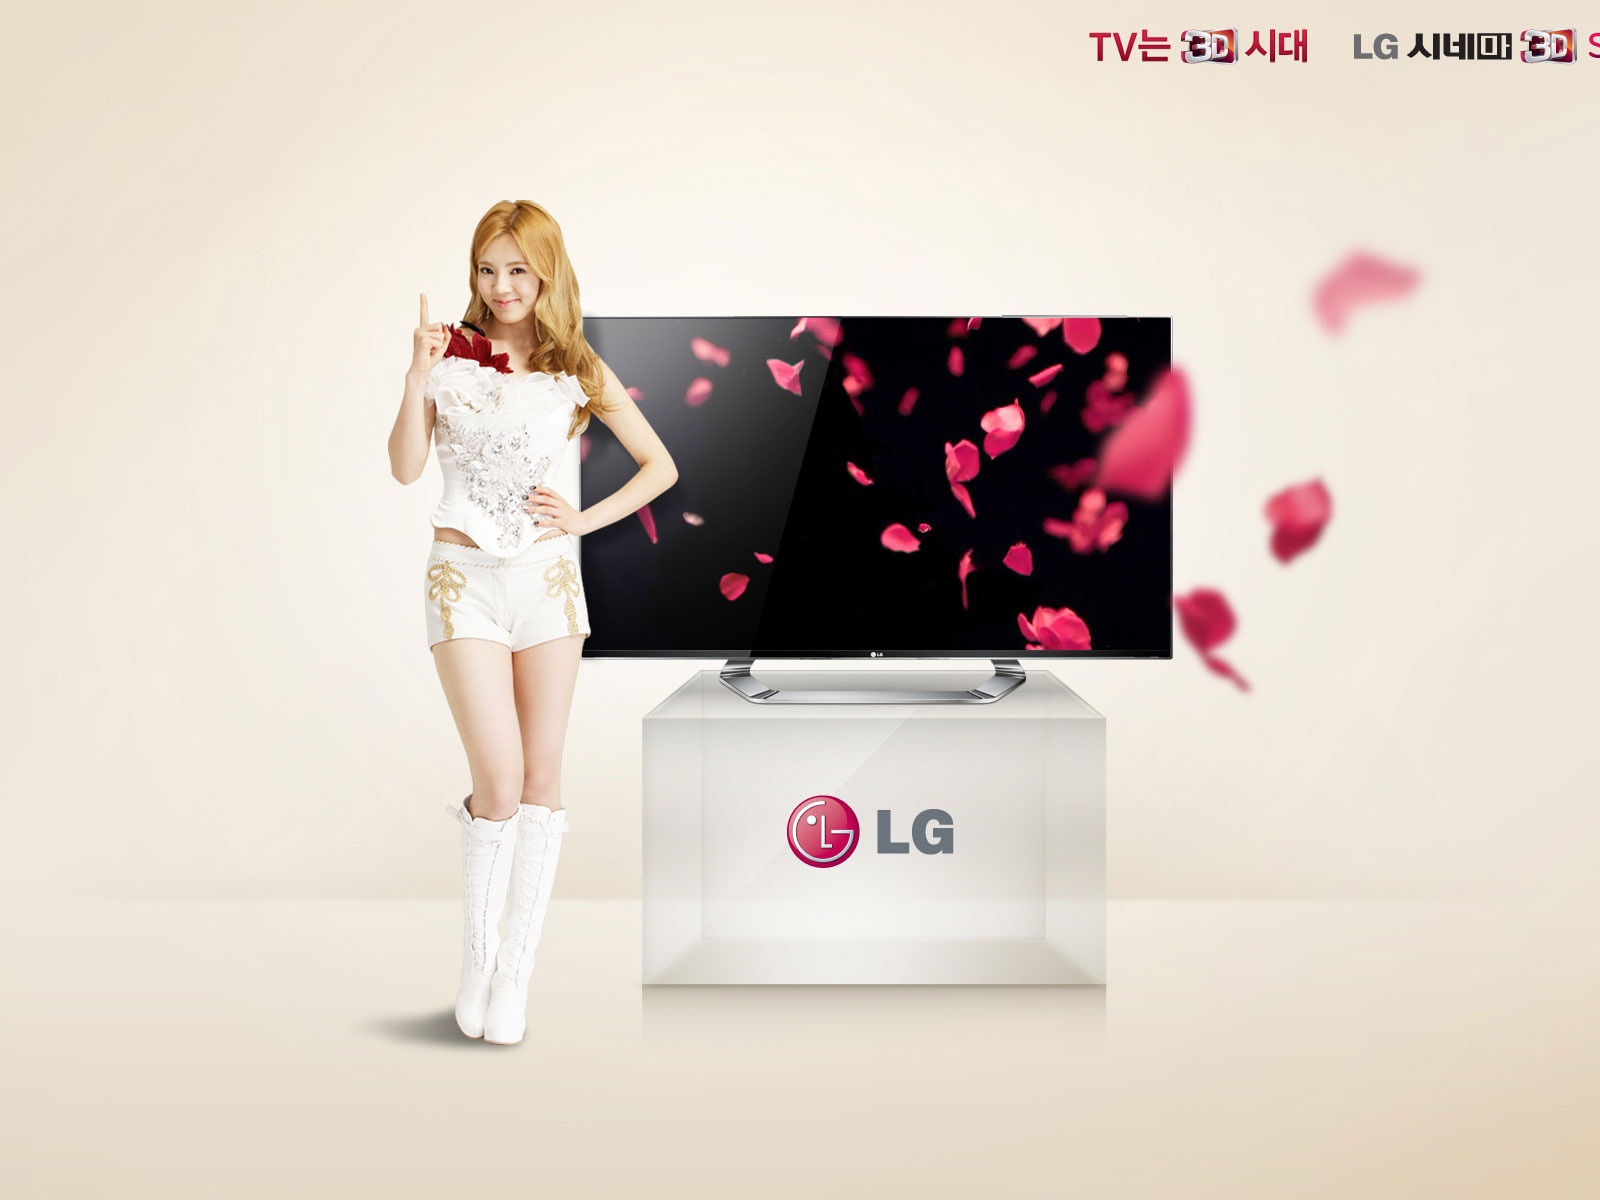 Girls Generation ACE and LG endorsements ads HD wallpapers #13 - 1600x1200